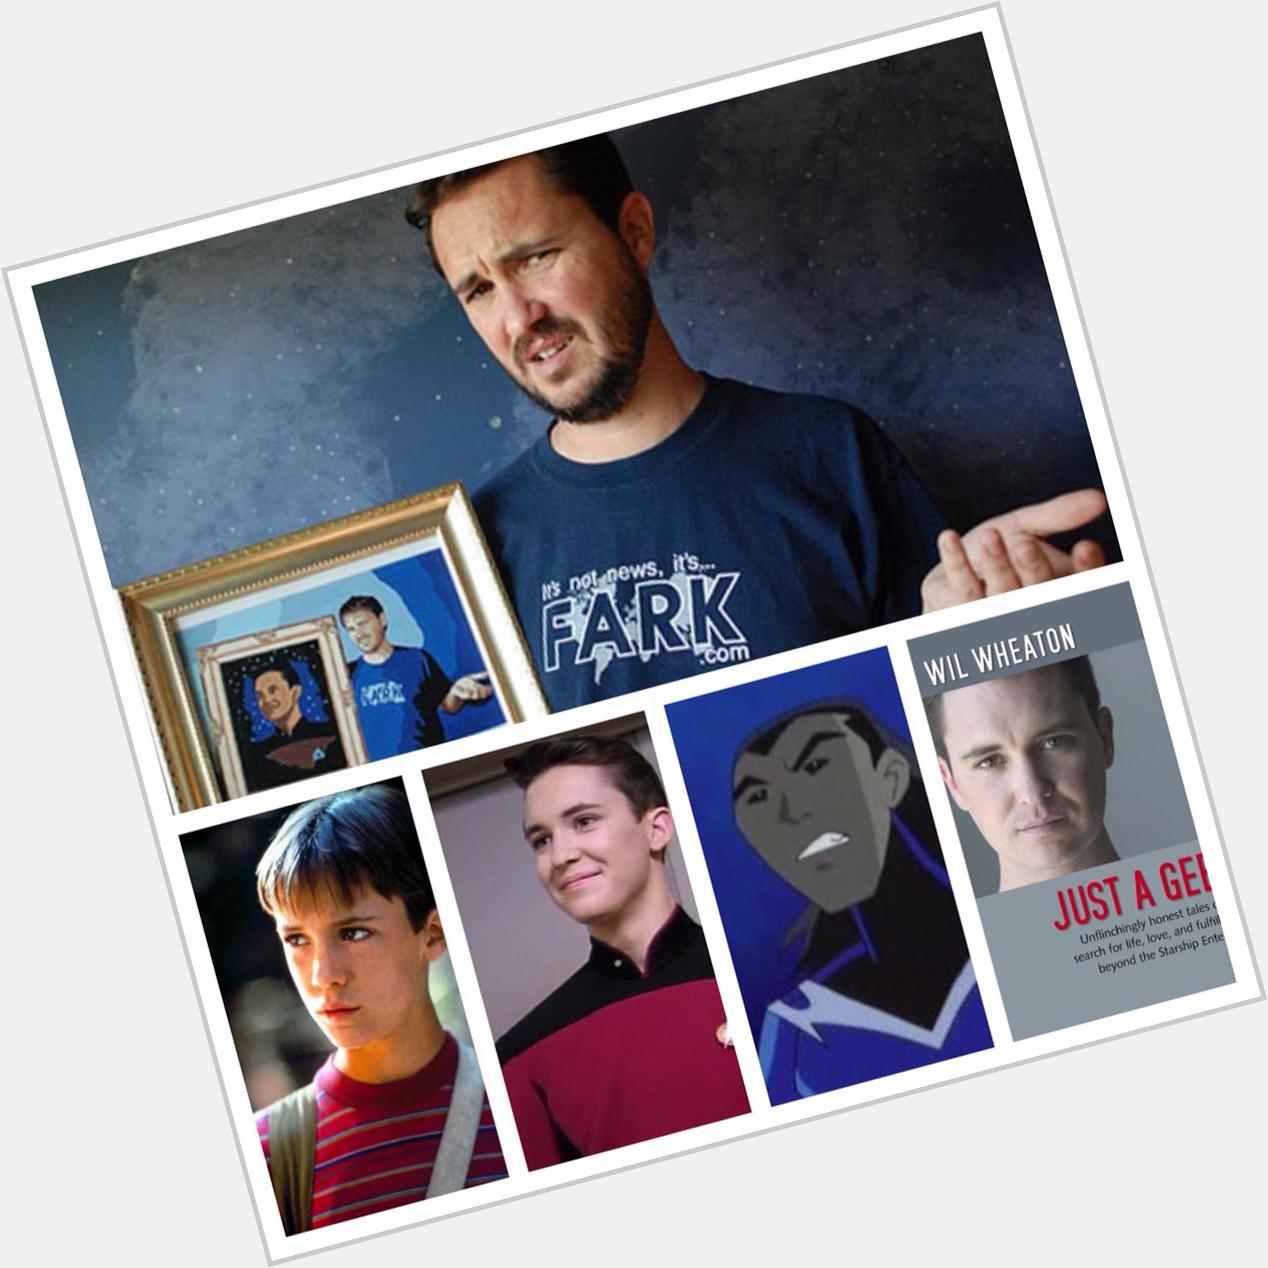 Happy birthday to Wil Wheaton! Thanks for standing by us geeks for new generations! 